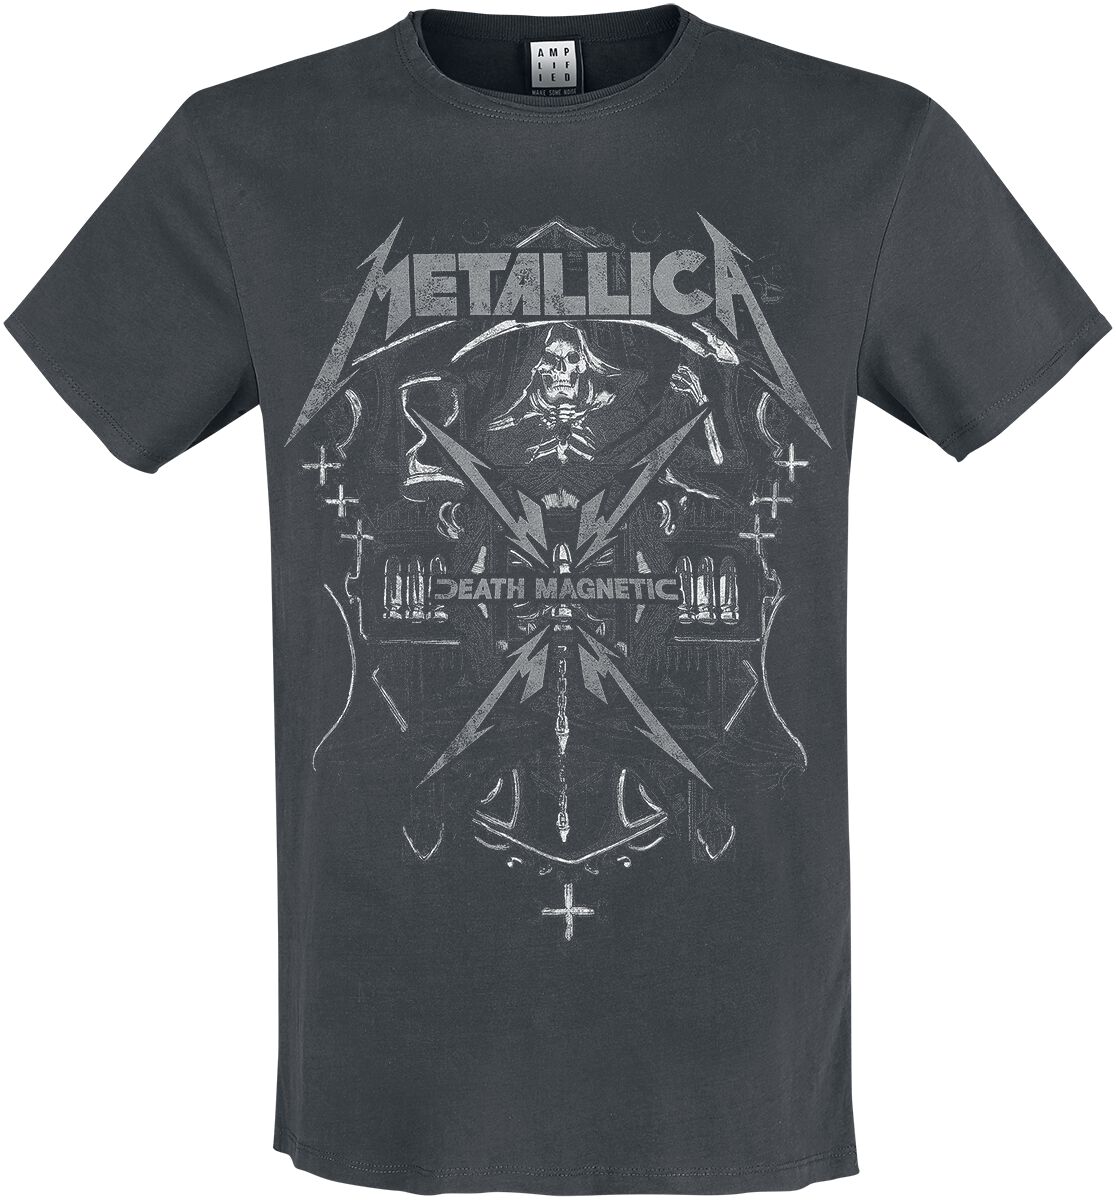 Metallica Amplified Collection - Death Magnatic T-Shirt charcoal